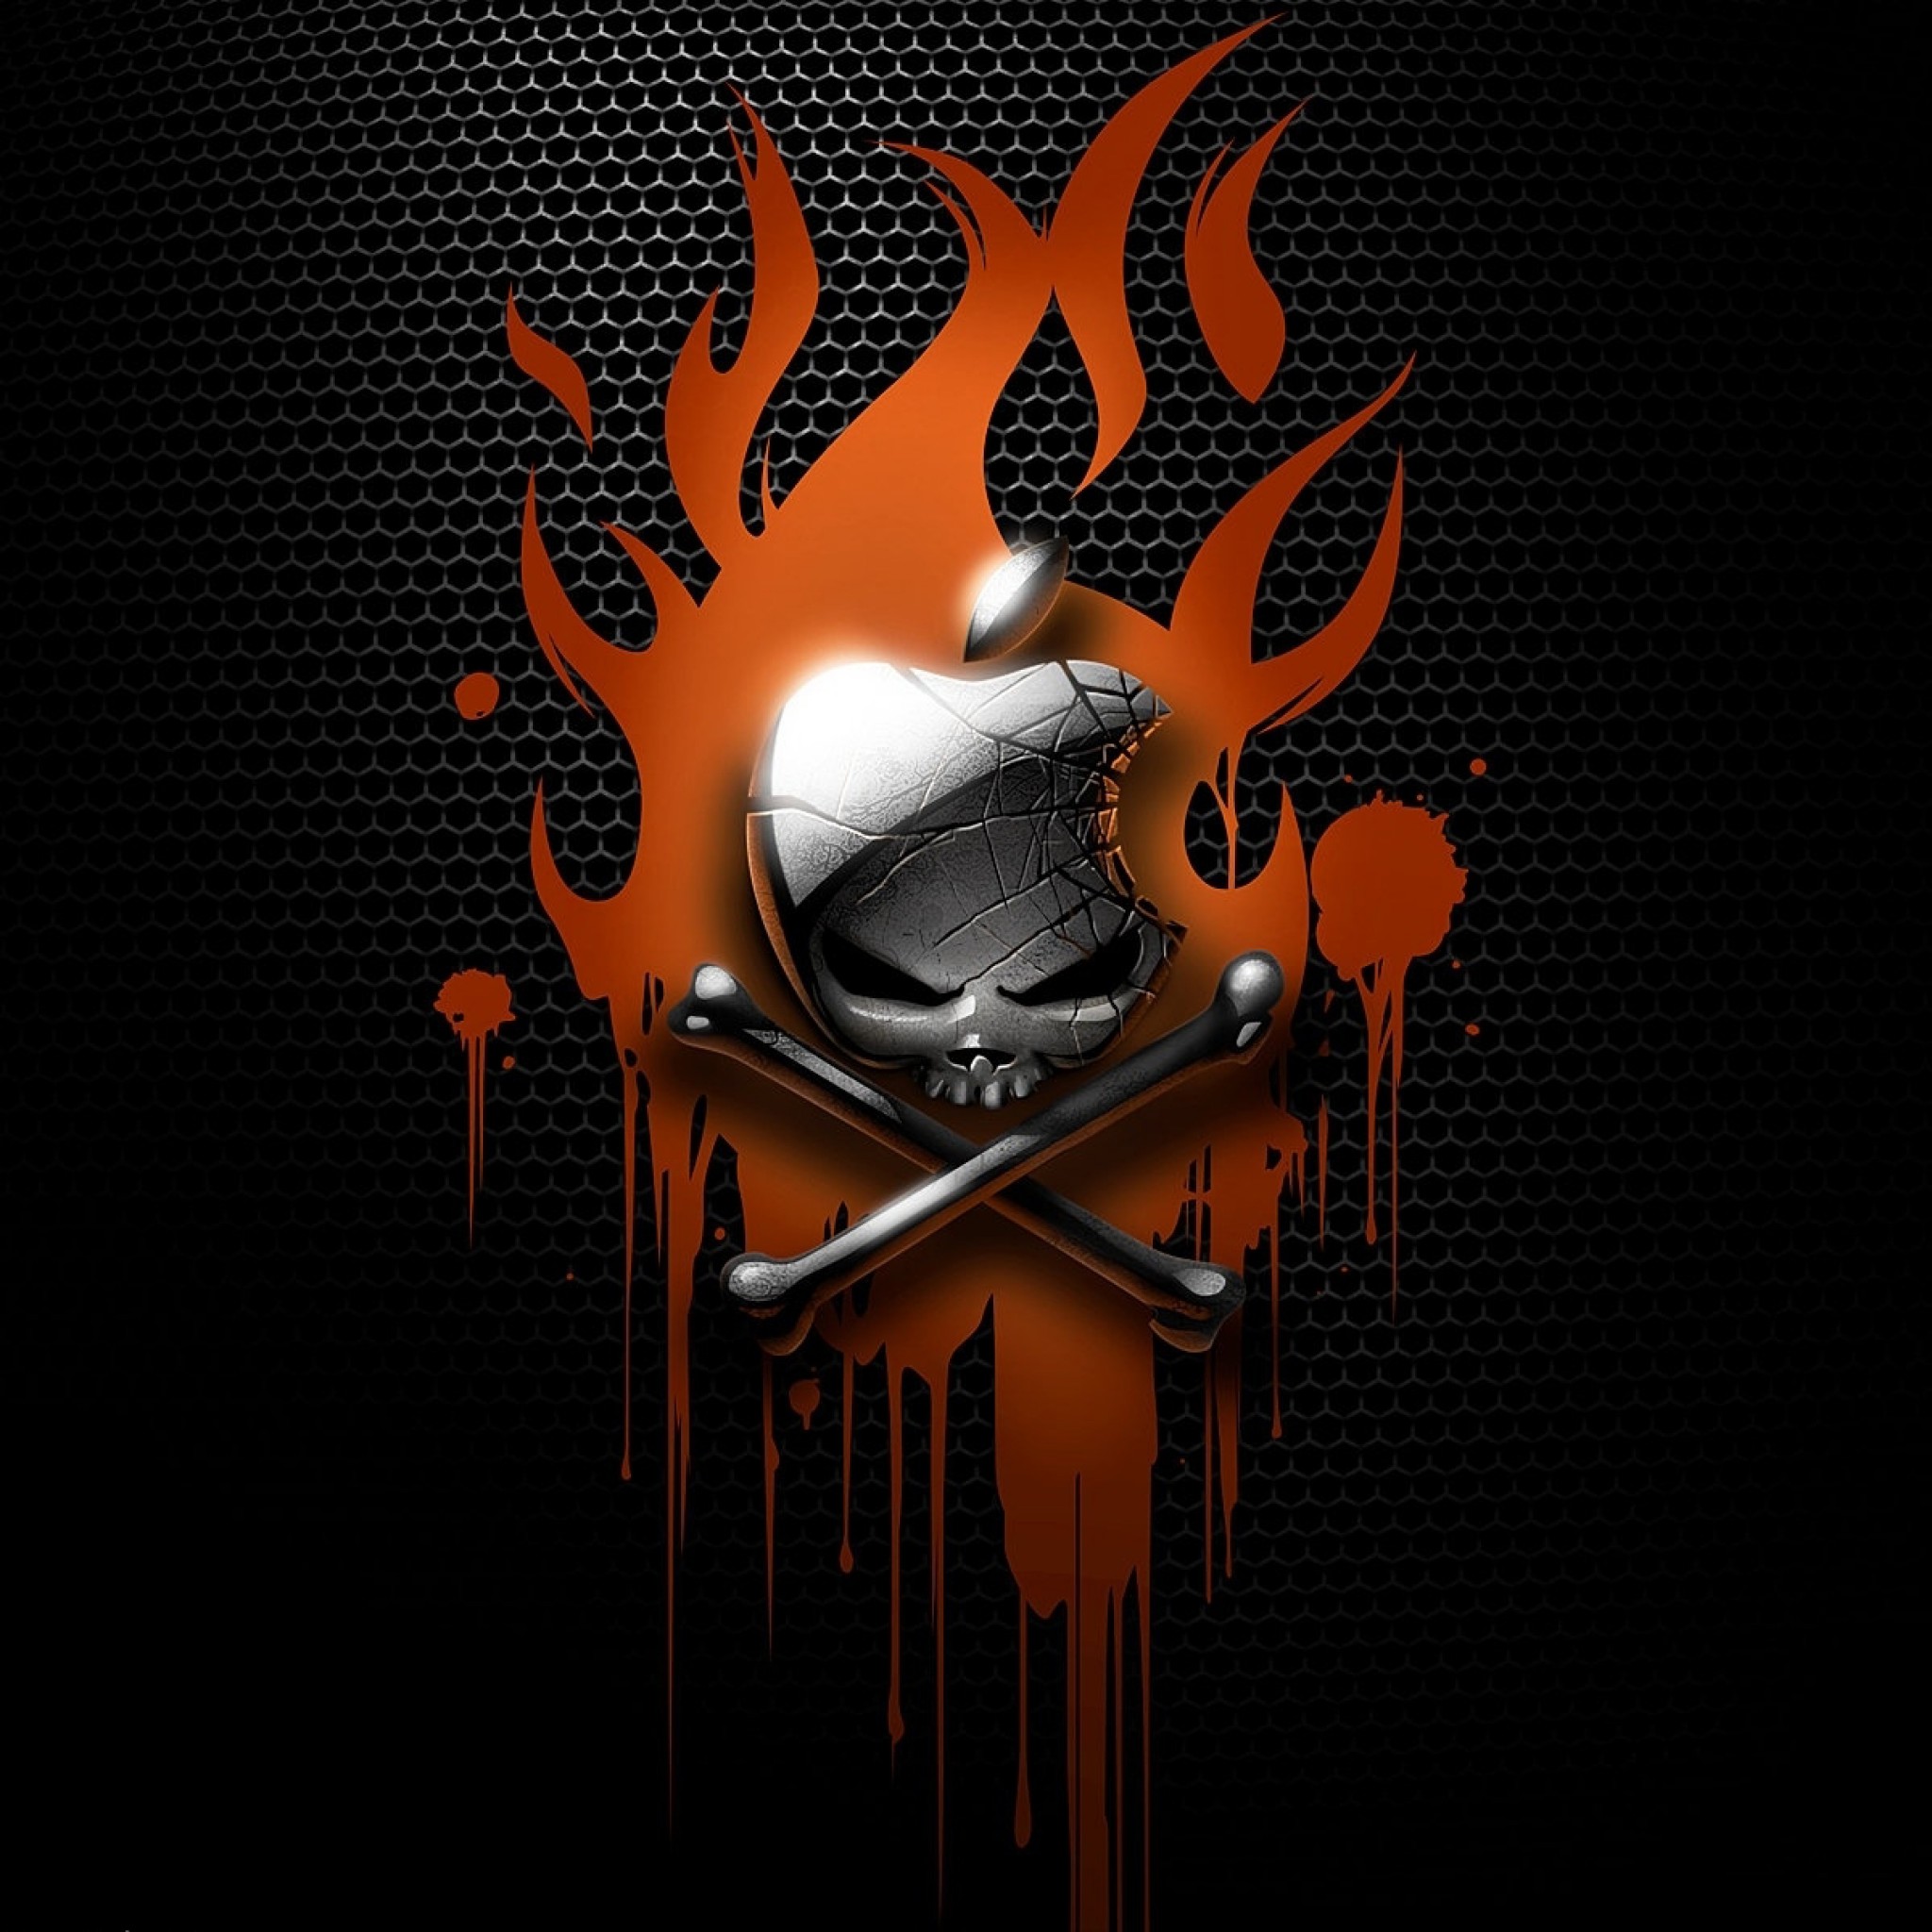 Fantasy Scary Silver Skull Apple Logo Theme In Red Burning Fire Backgorund Volcadot Wall Hd Wallpaper 48x48px Apple Logo Wallpaper For Iphone 4 Apple Logo Background For Desktop Symbols On A